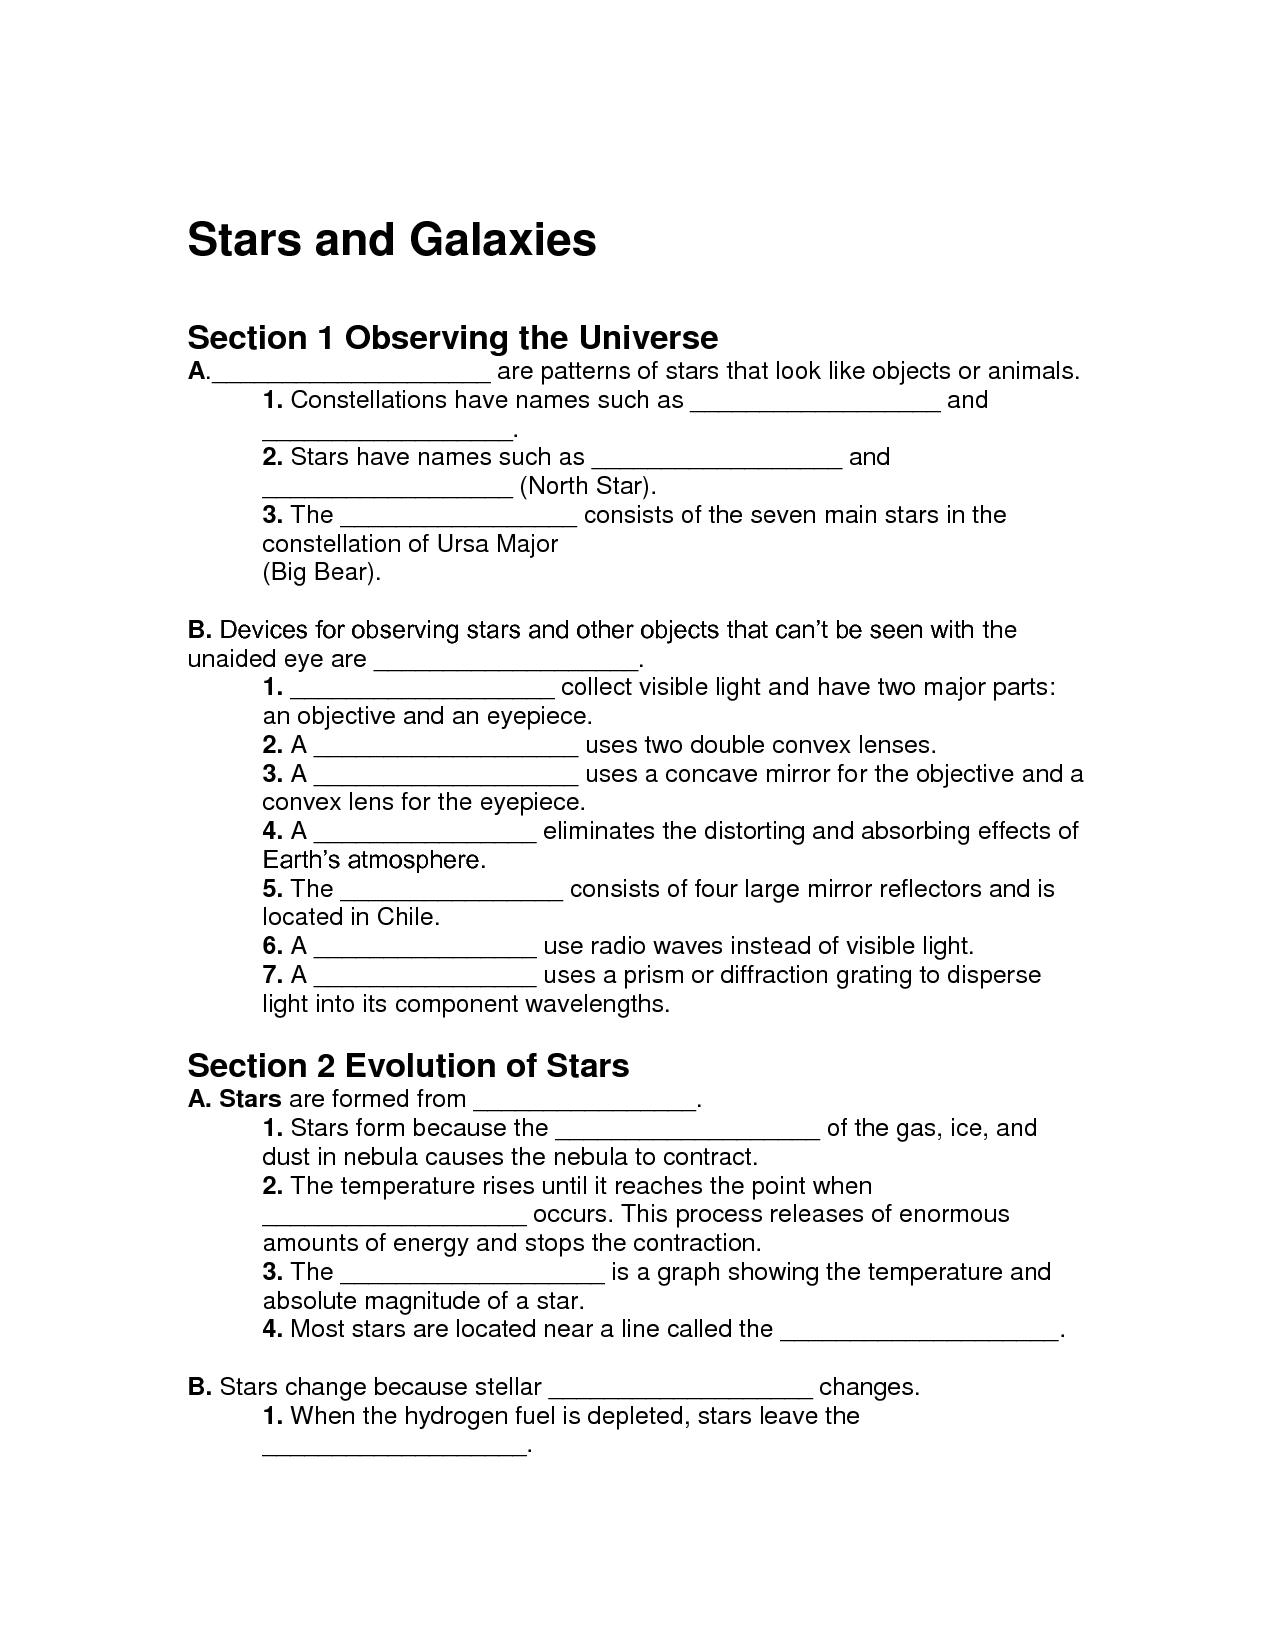 Stars In Perspective Worksheet Answers